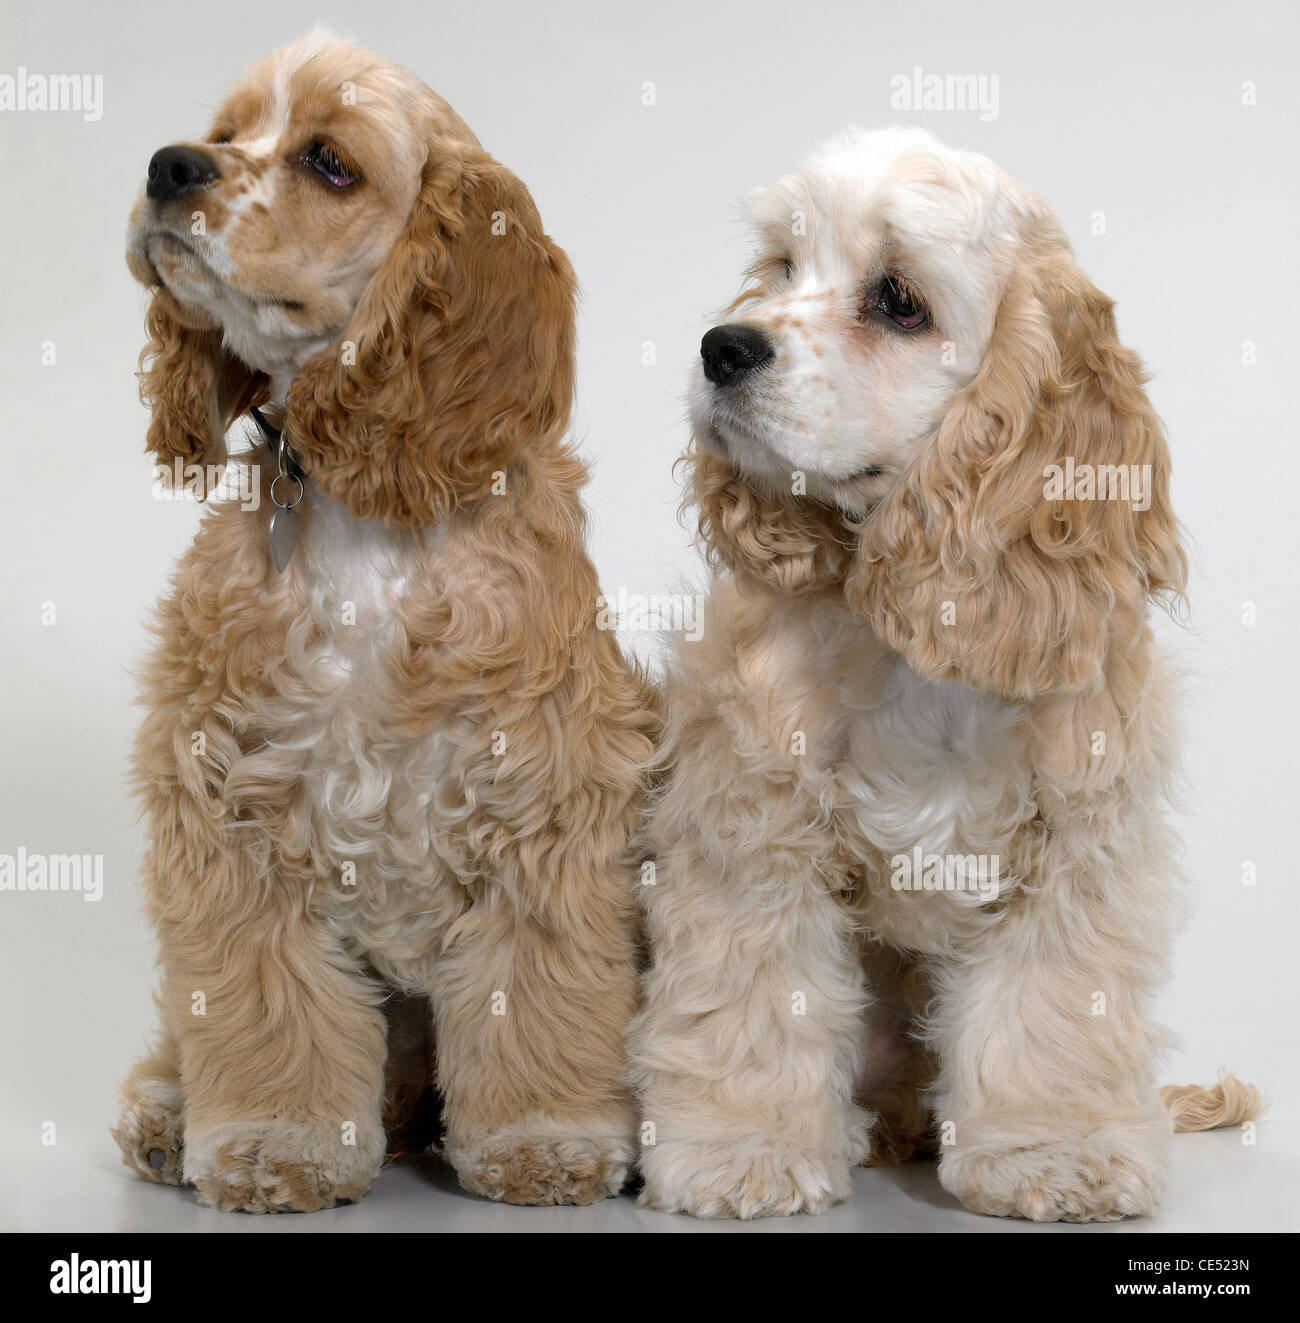 Two American Cocker Spaniel dogs looking away Stock Photo